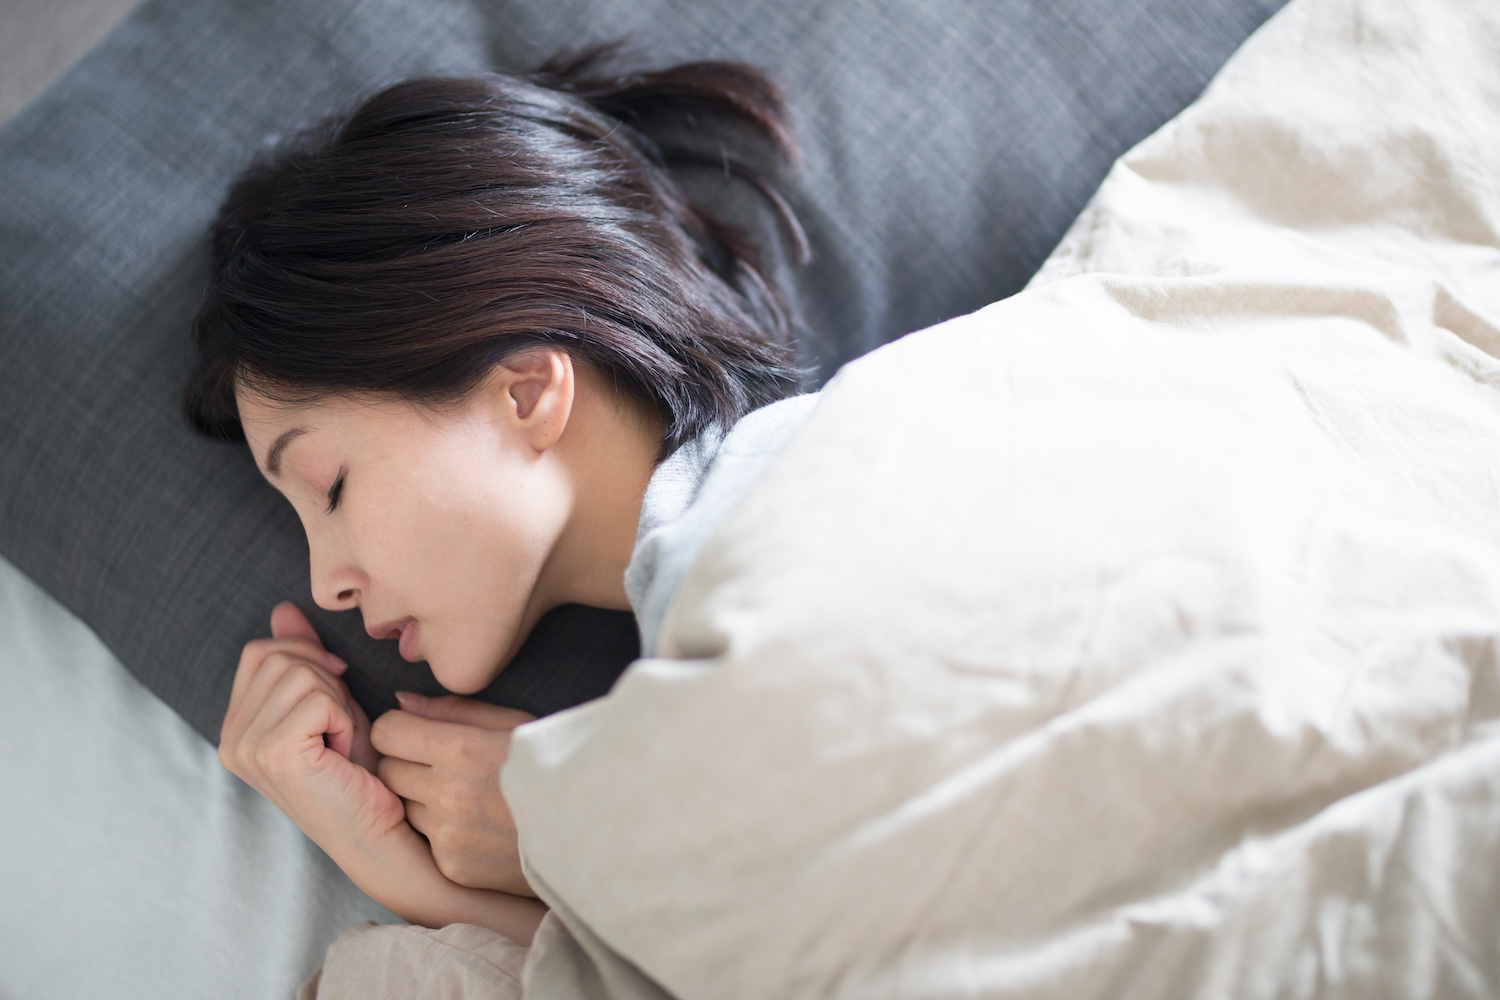 How Important is Sleep for Women's Health? | The Doctor Weighs In